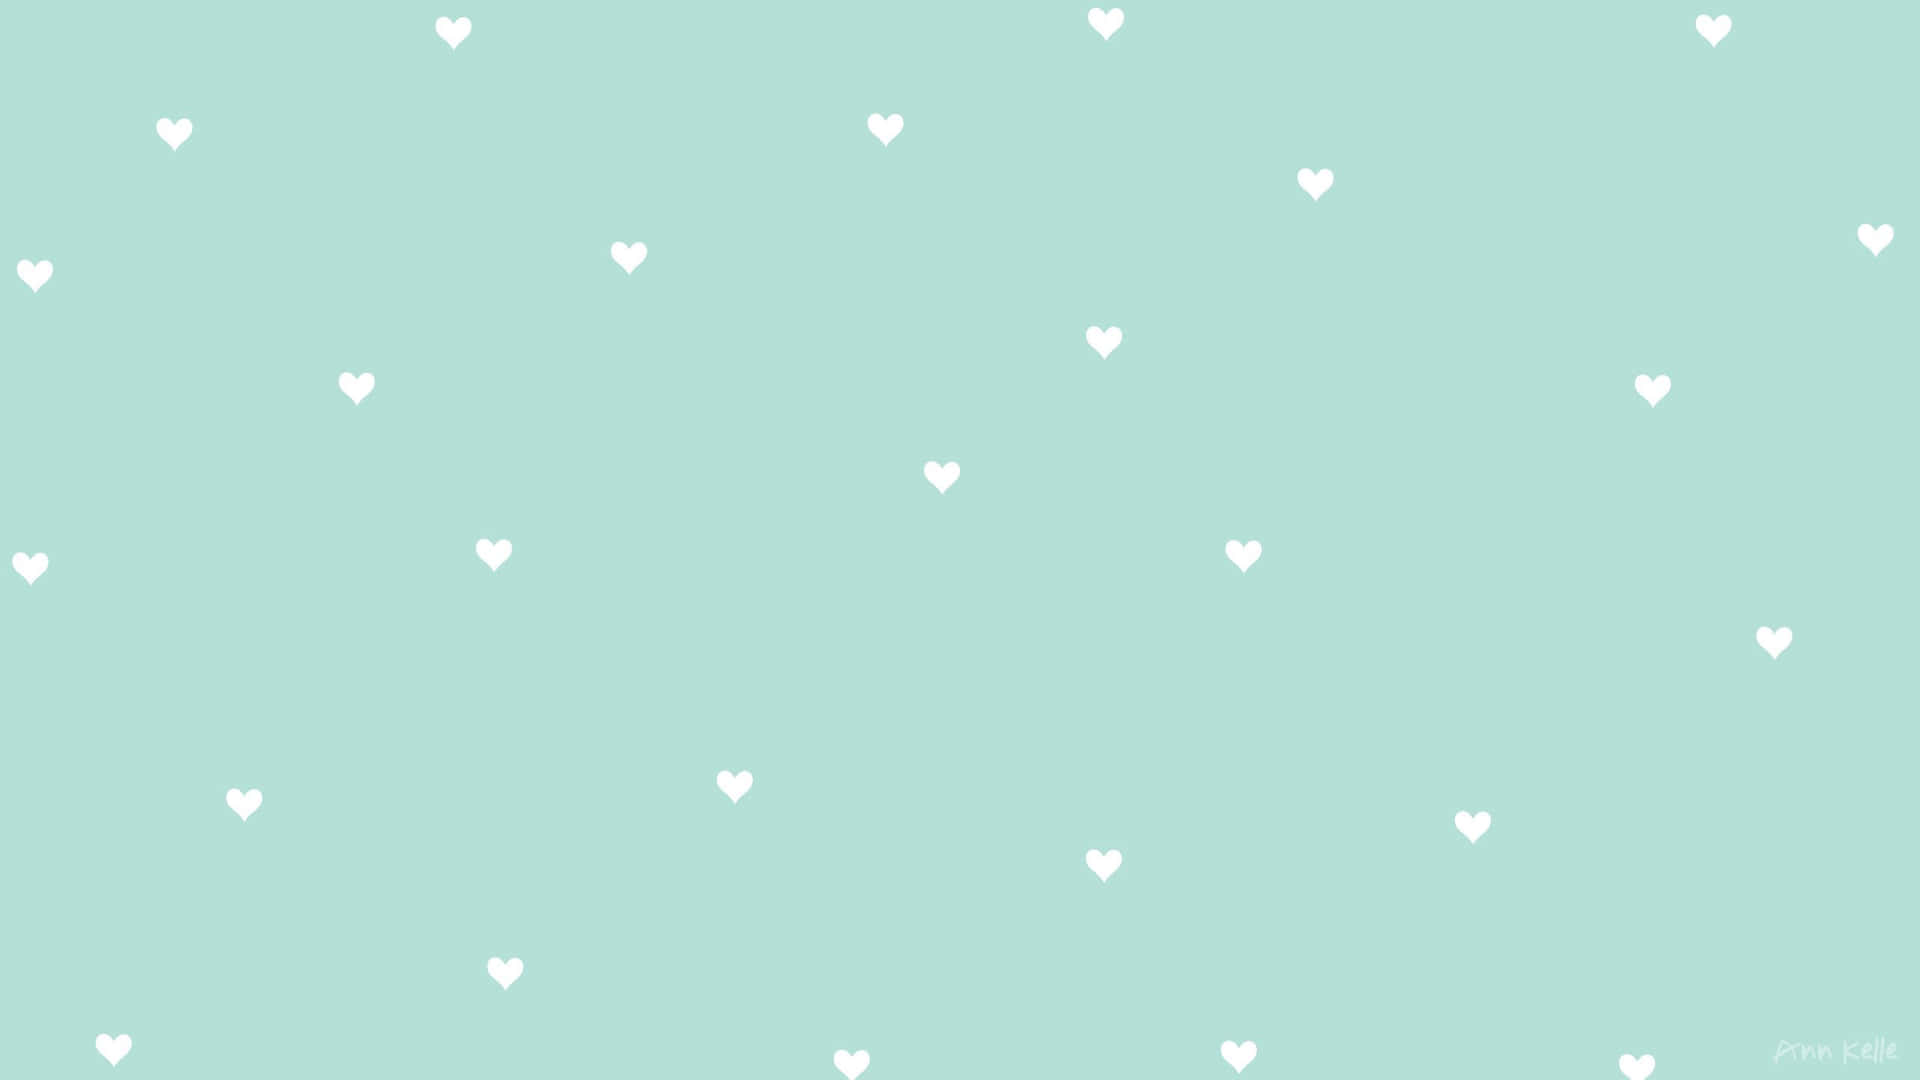 Feel the love with these bright, mint green hearts Wallpaper